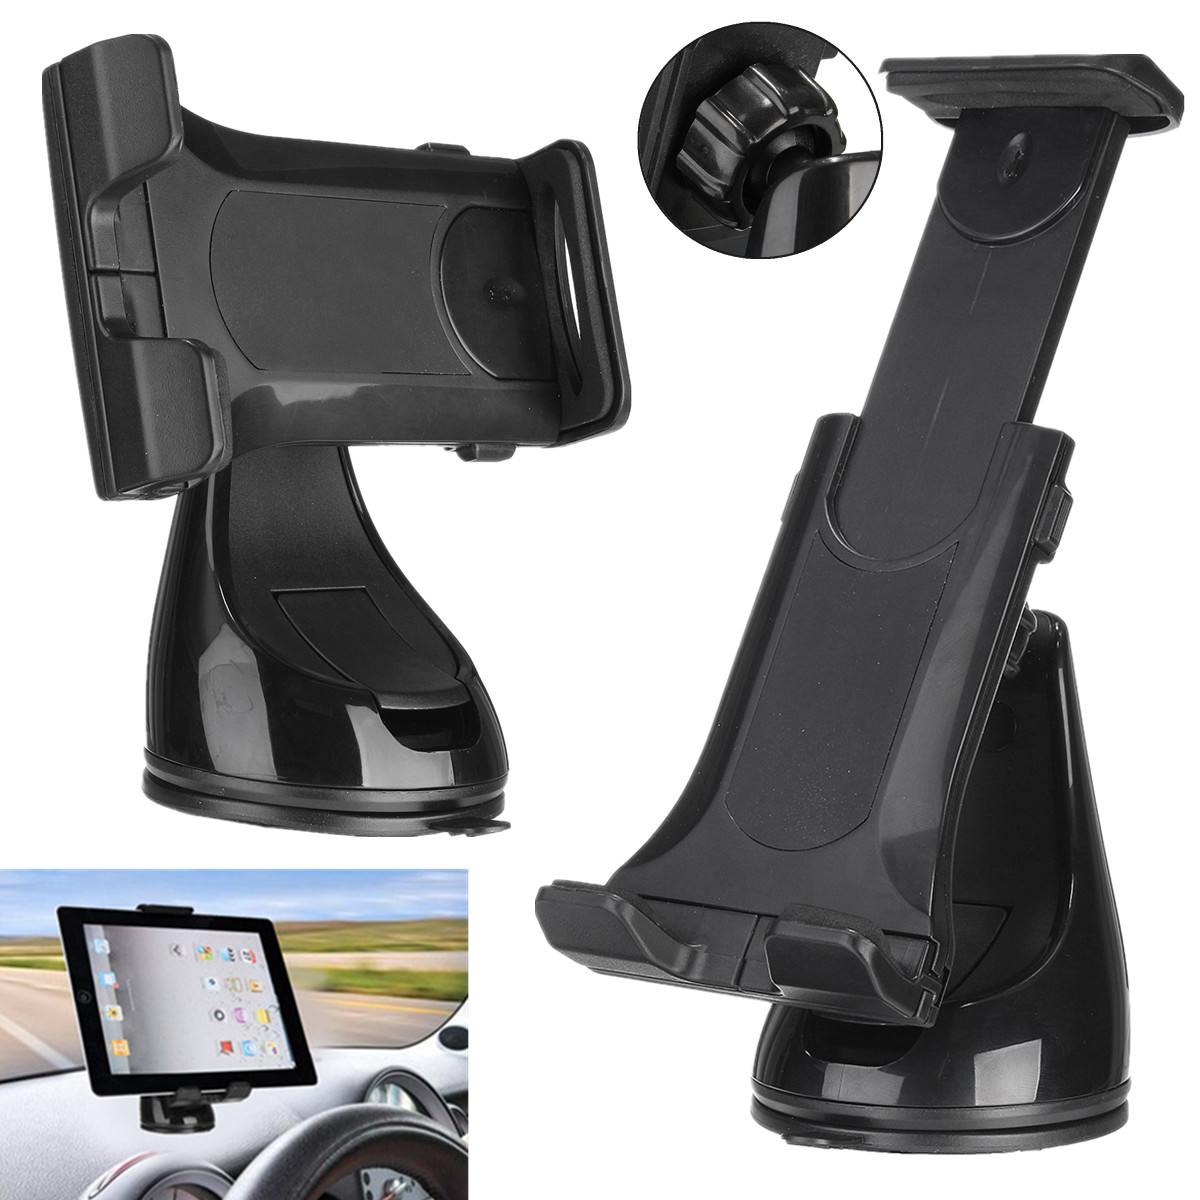 

Universal Car Wind Shield Stand Suction Cup PhonE Mount Holder for iPhone iPad Samsung Xiaomi Tablets